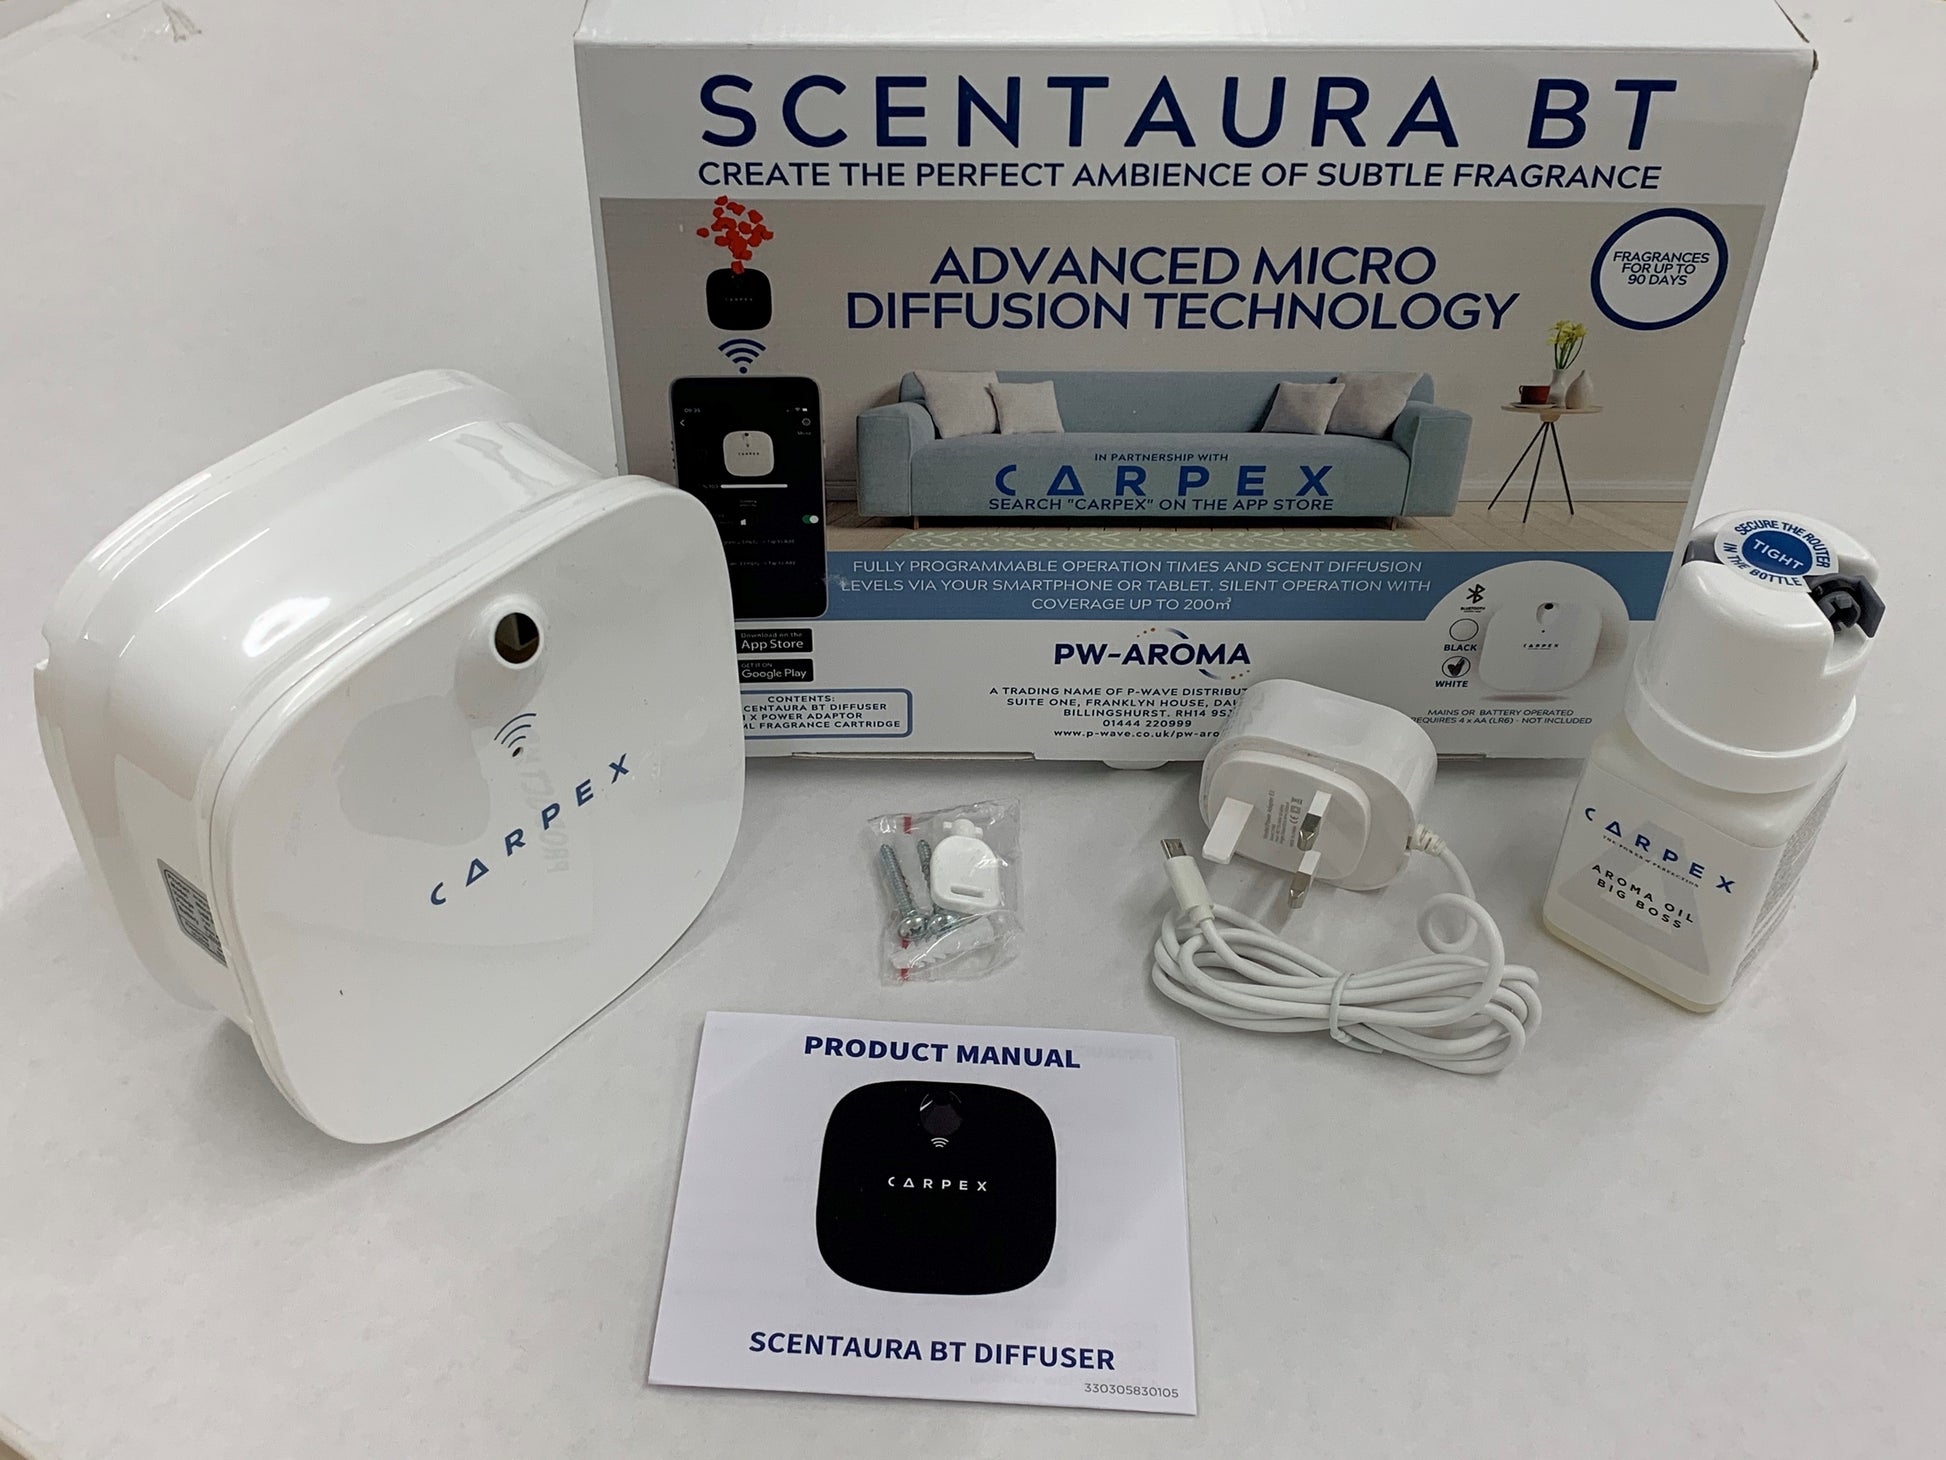 Scentaura BT Starter Kit Box and contents